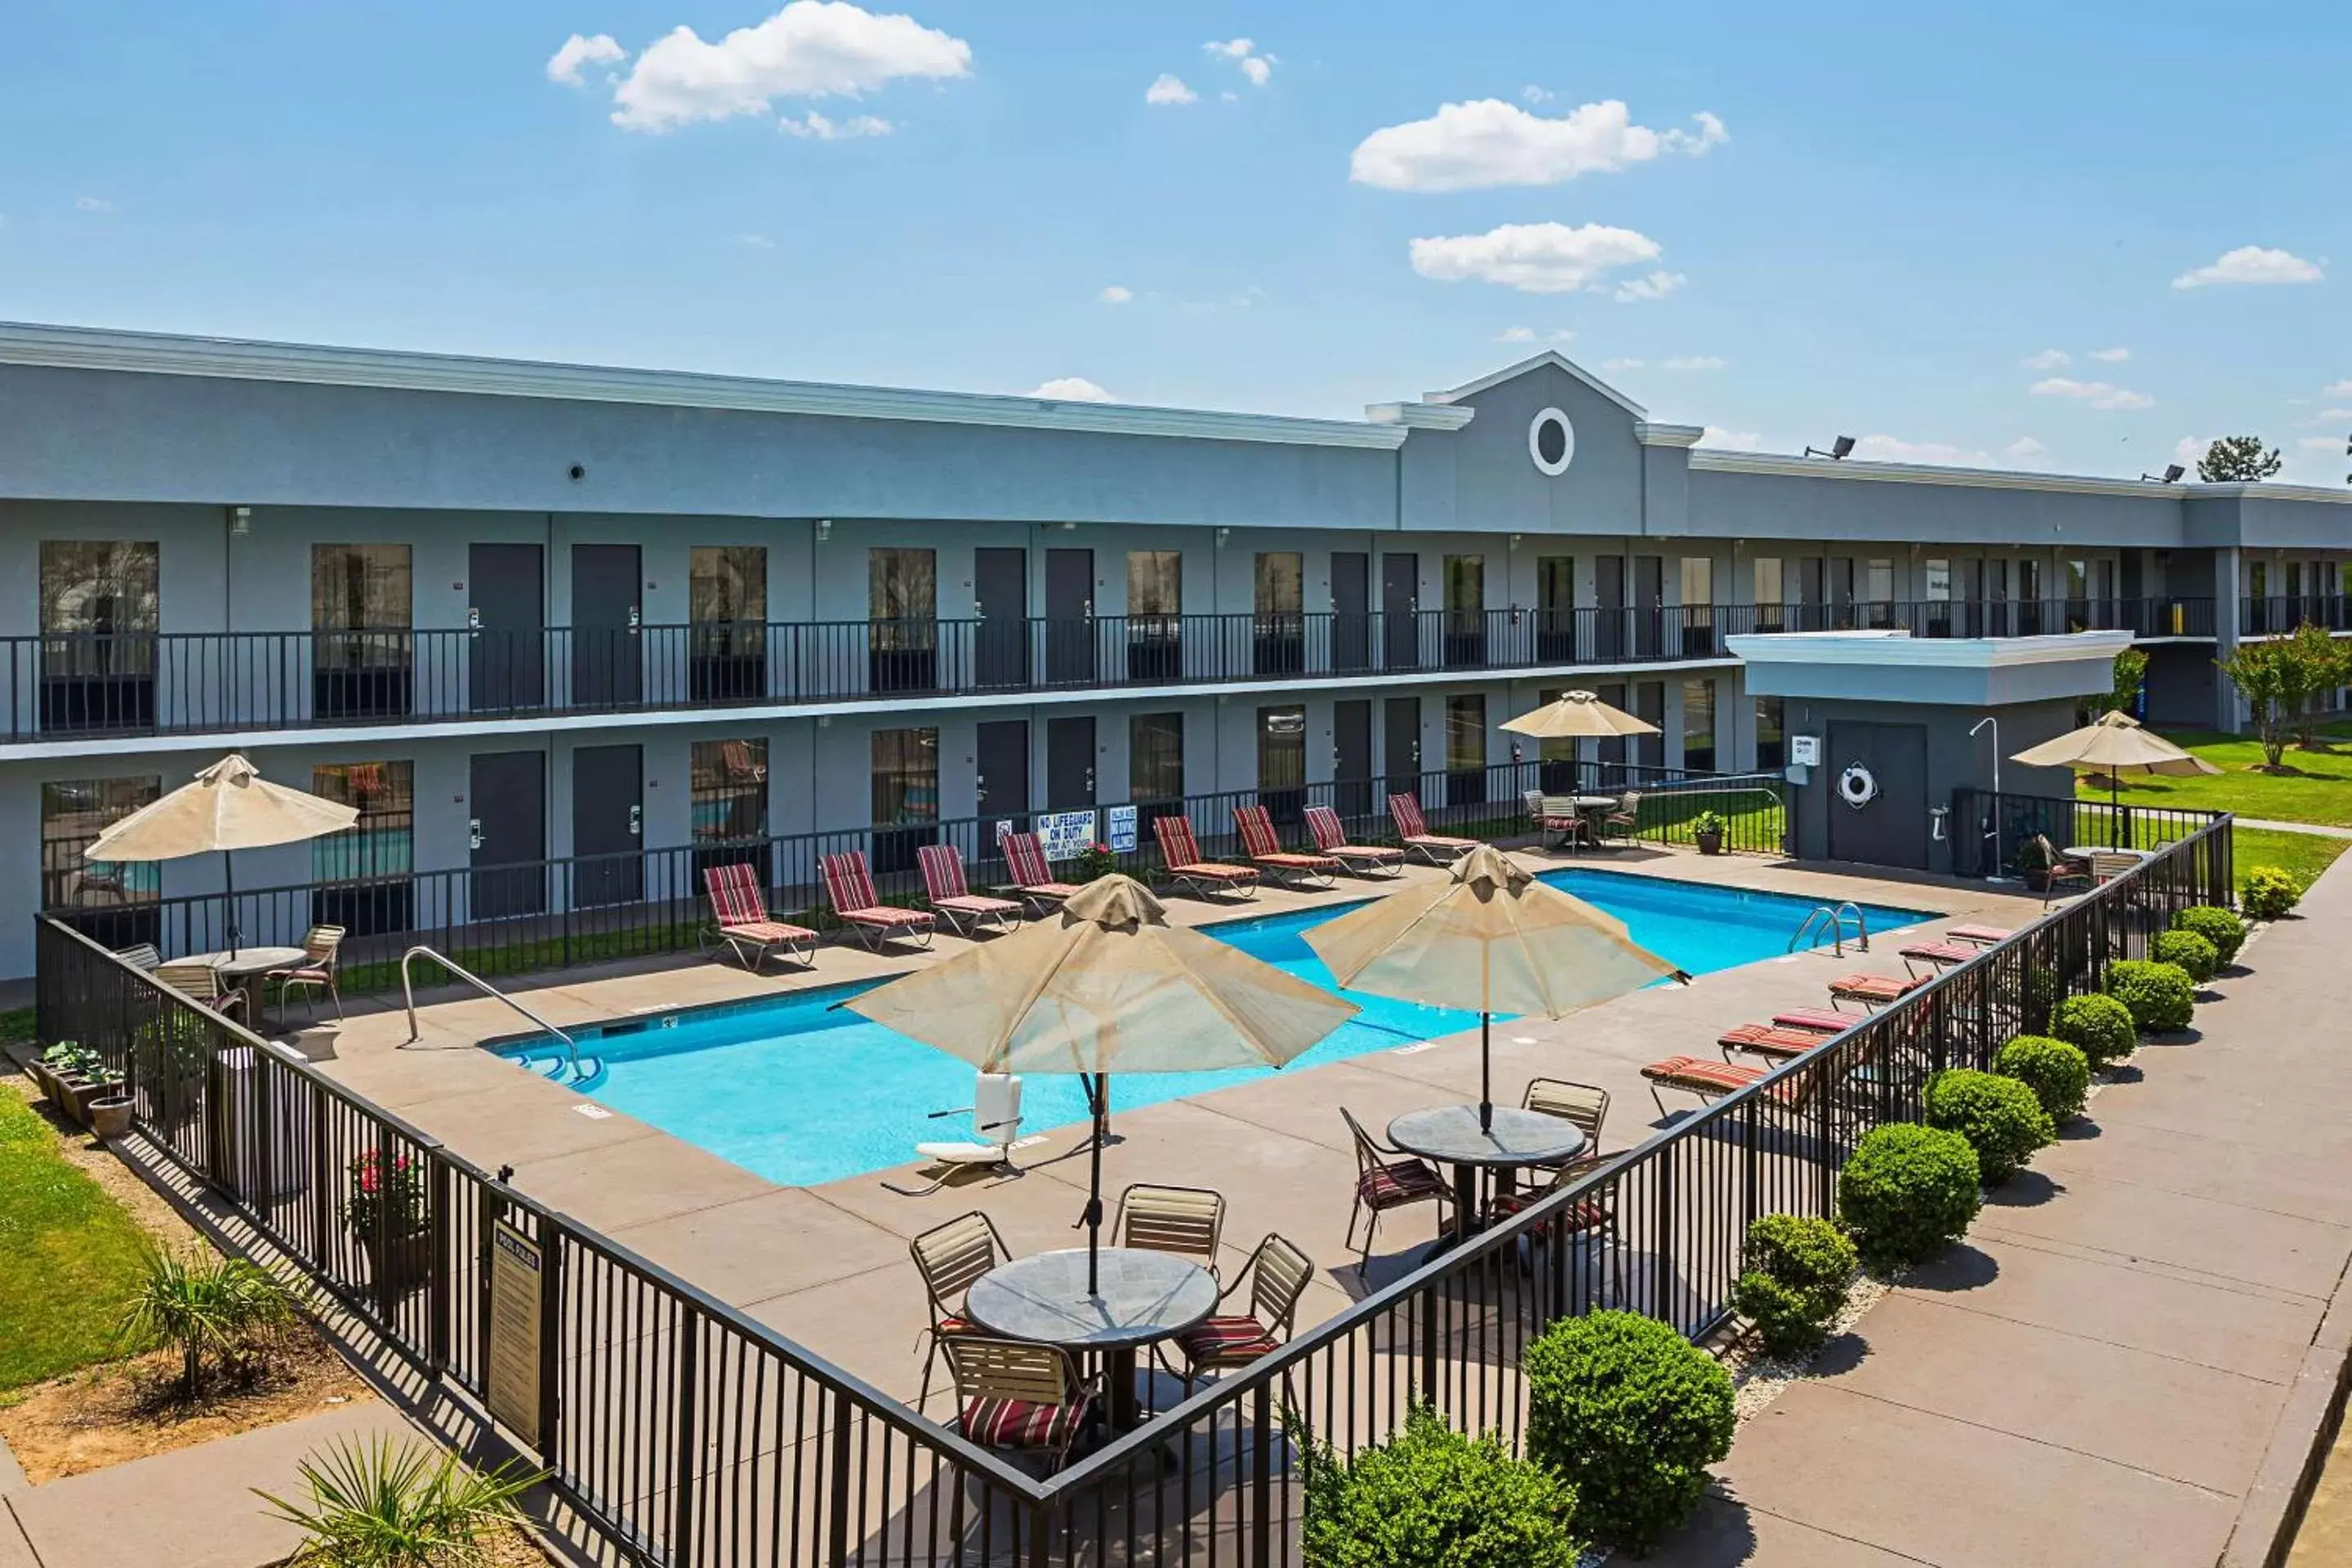 On site, Pool View in Quality Inn & Suites Greenville - Haywood Mall